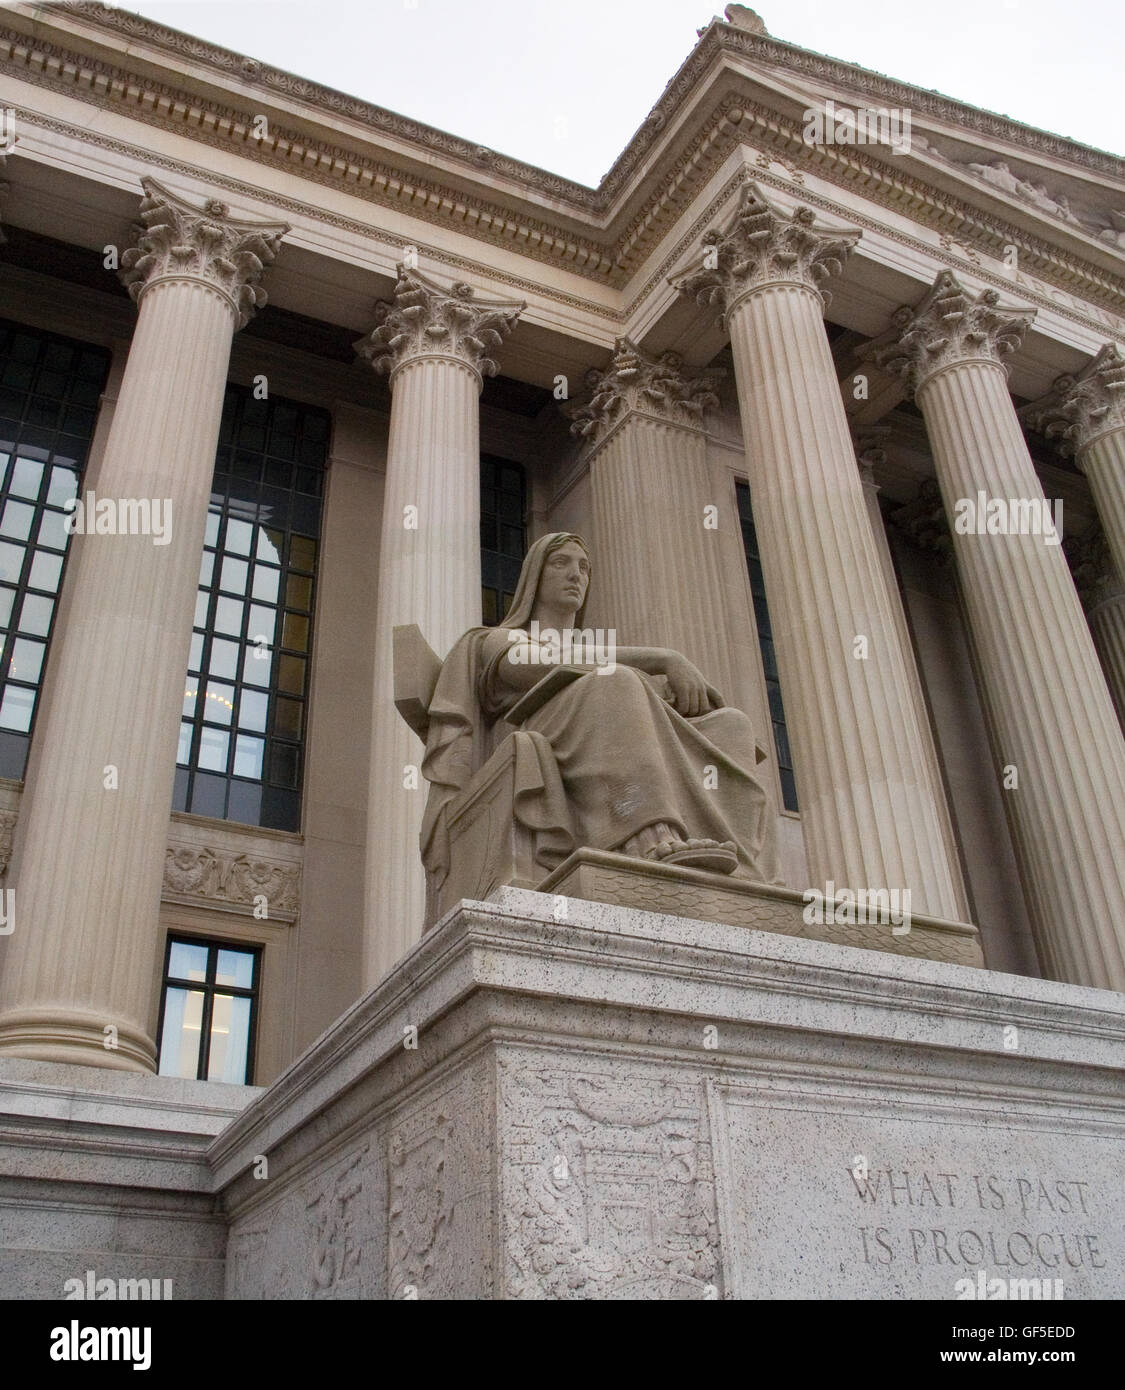 The National Archives building in Washington DC is one of the most impressive structures in the city. Stock Photo